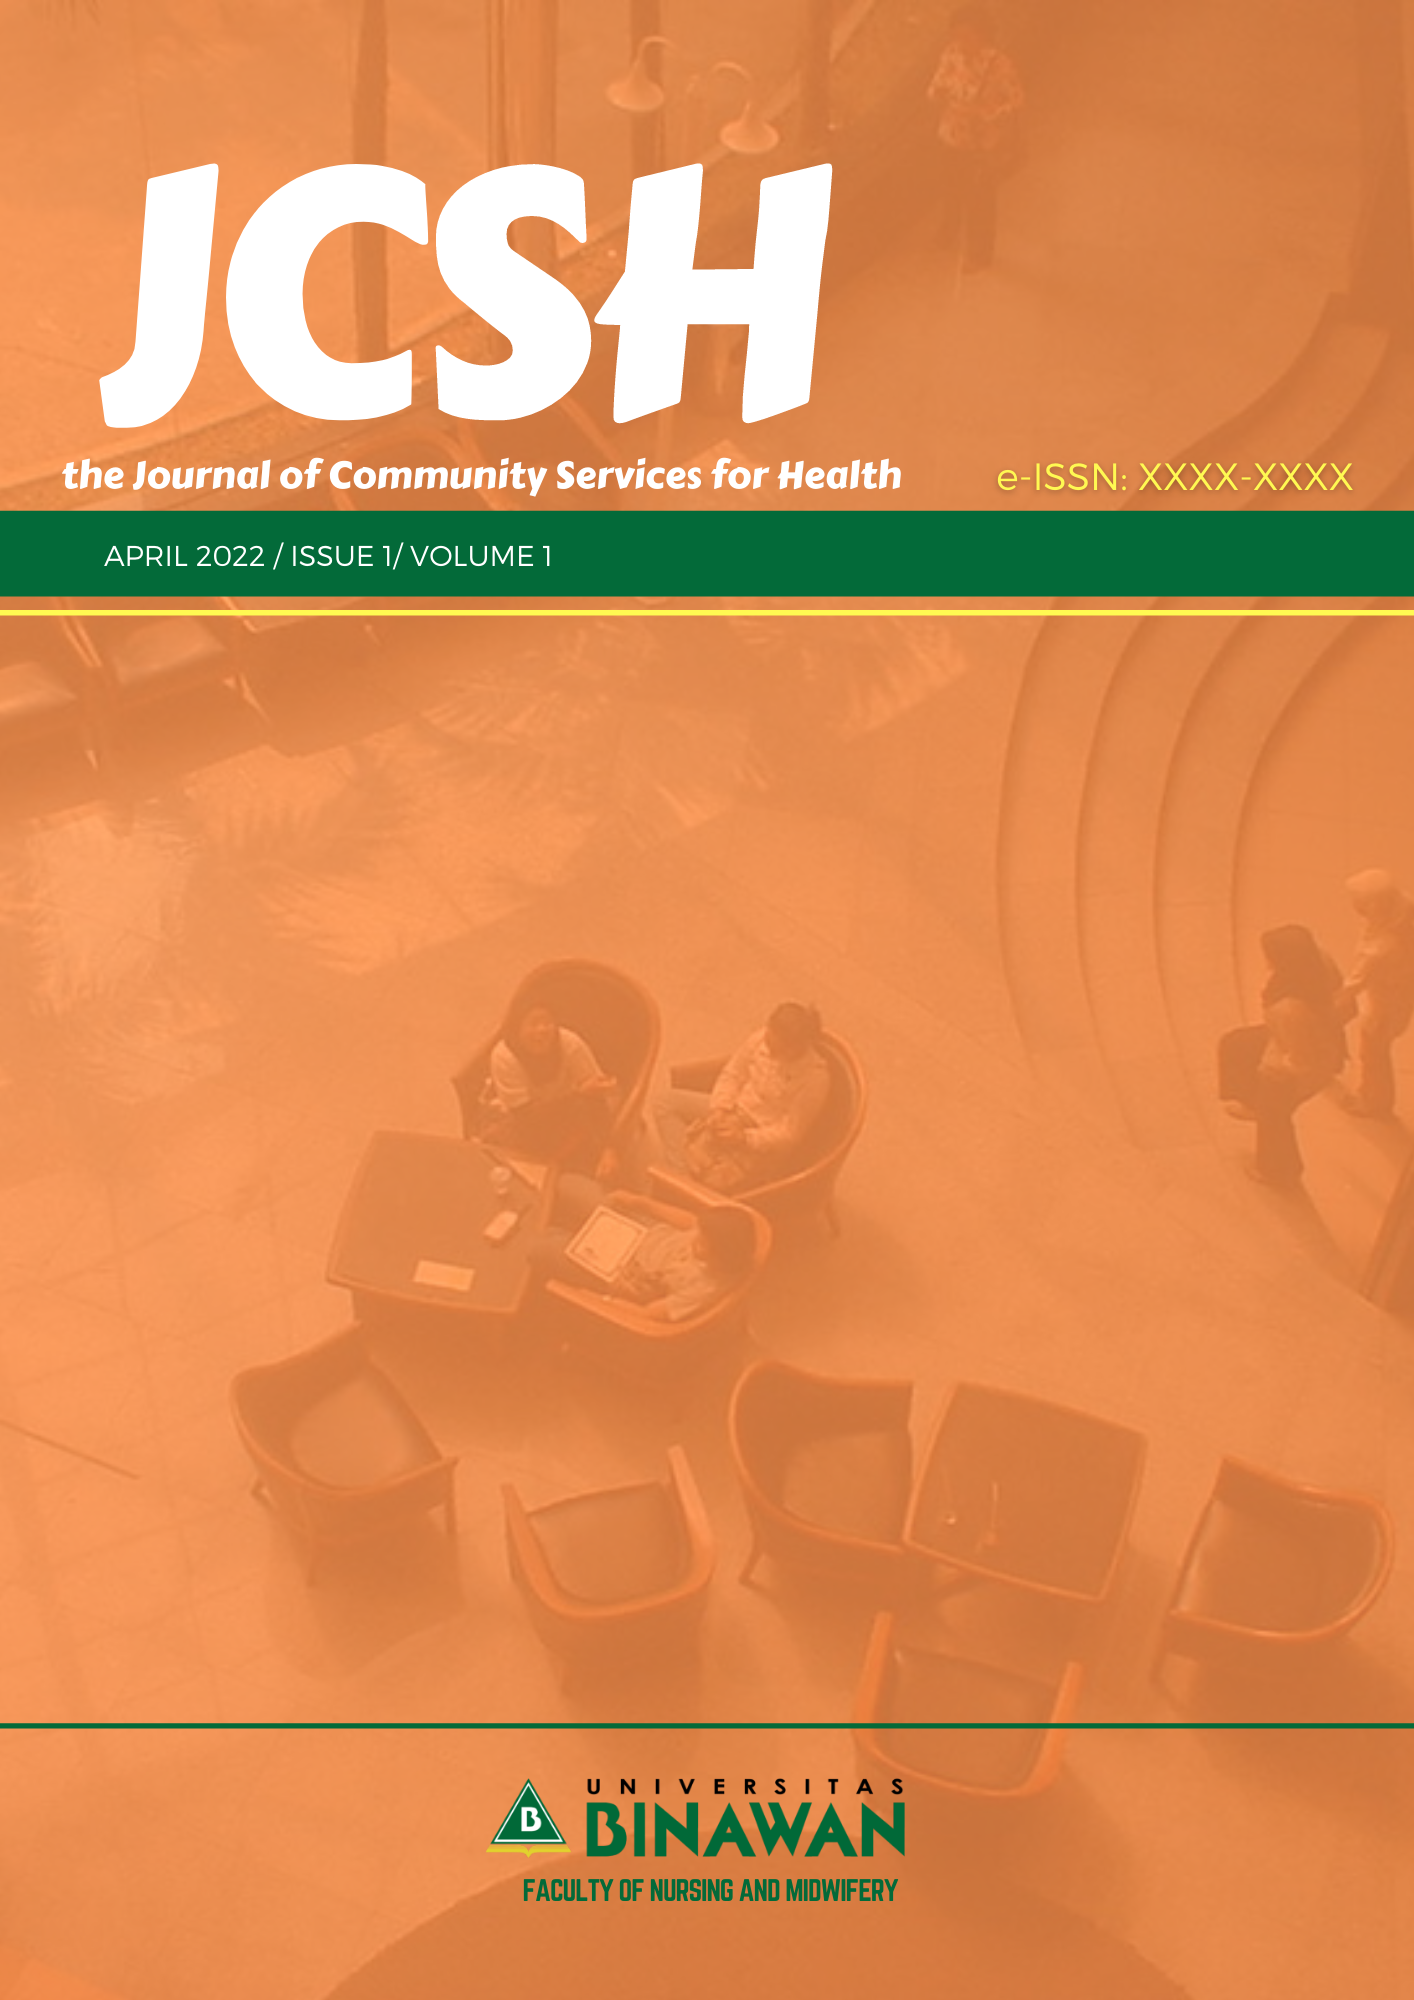 jcsh cover